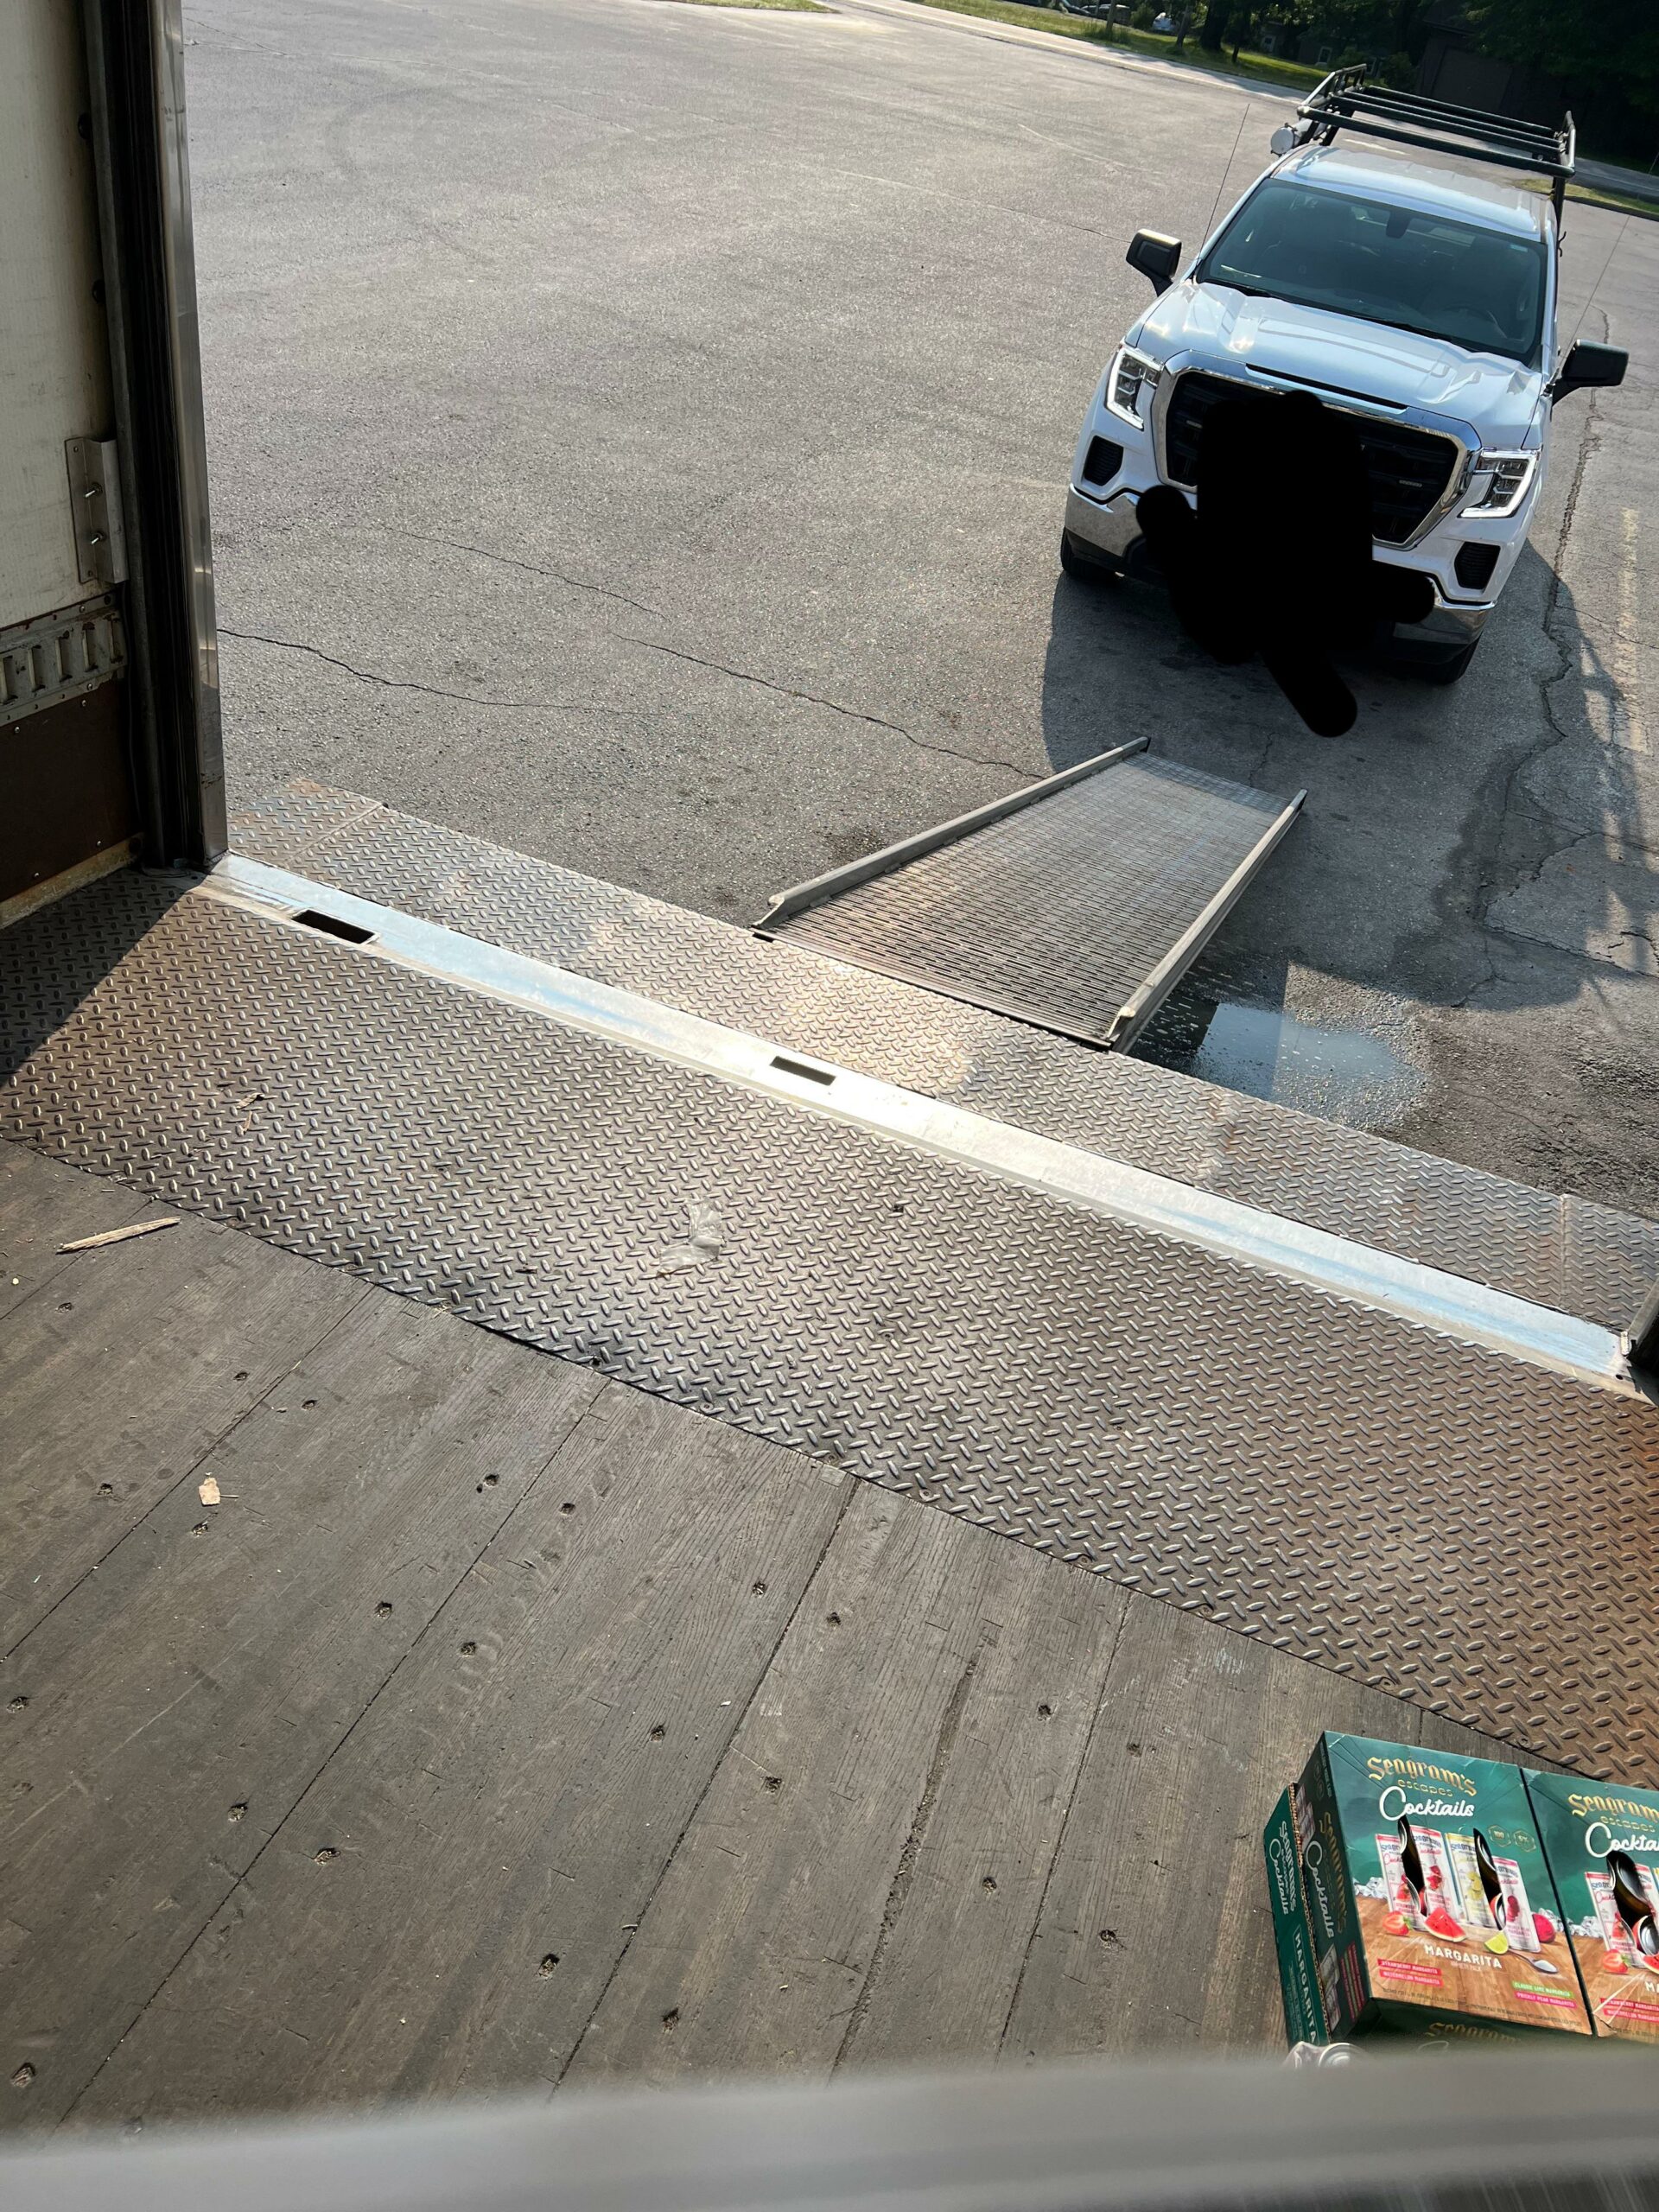 This person who parked right behind a delivery truck’s loading ramp.